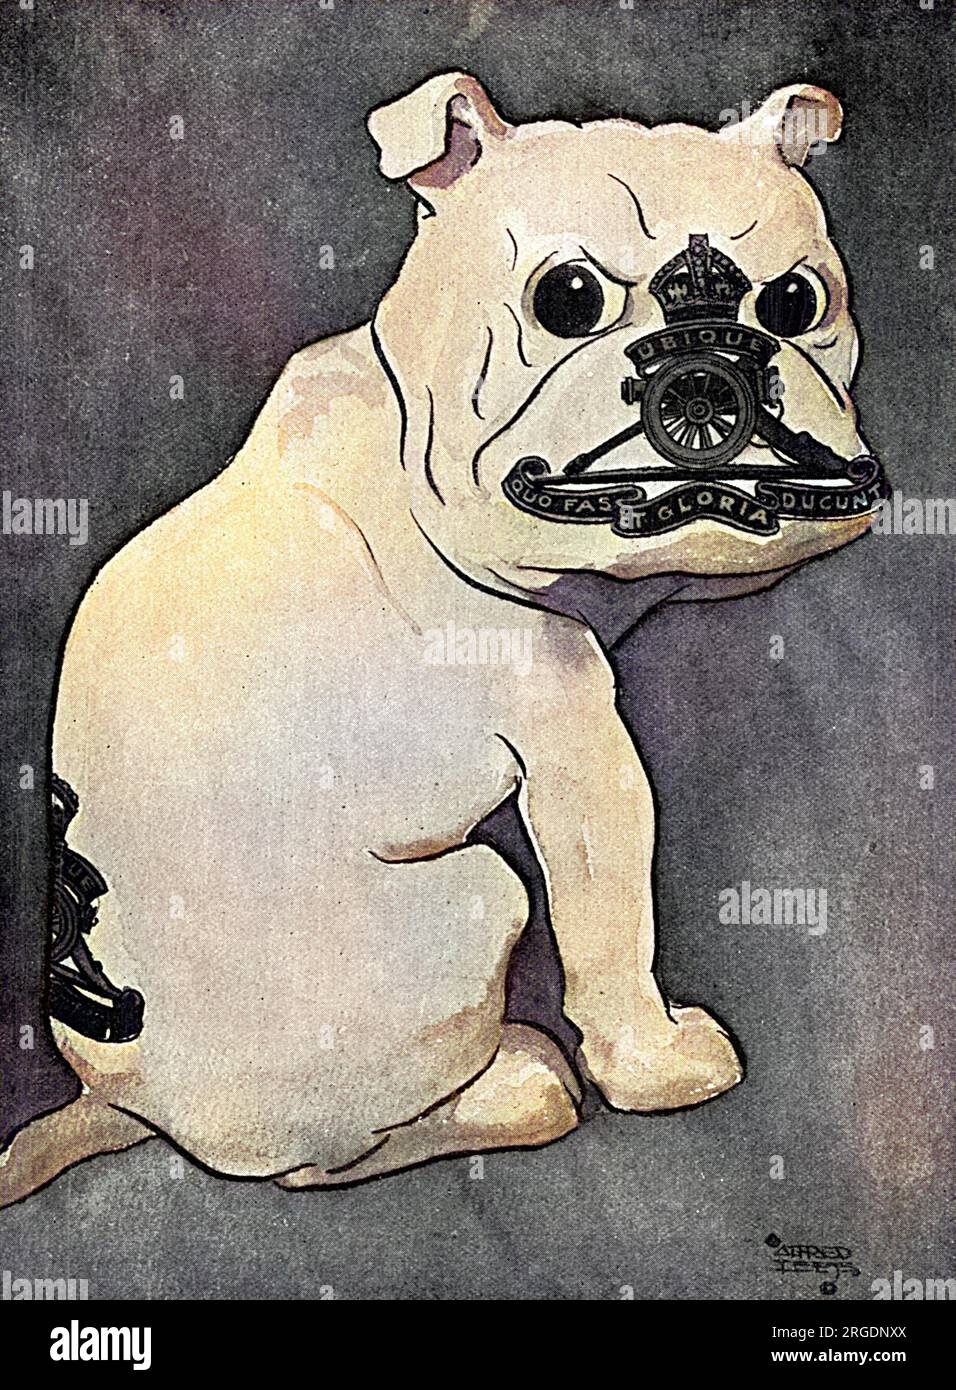 Masbadges!  Regimental mascots and badges in one!  No. 10 The bulldog of the Royal Artillery. Stock Photo